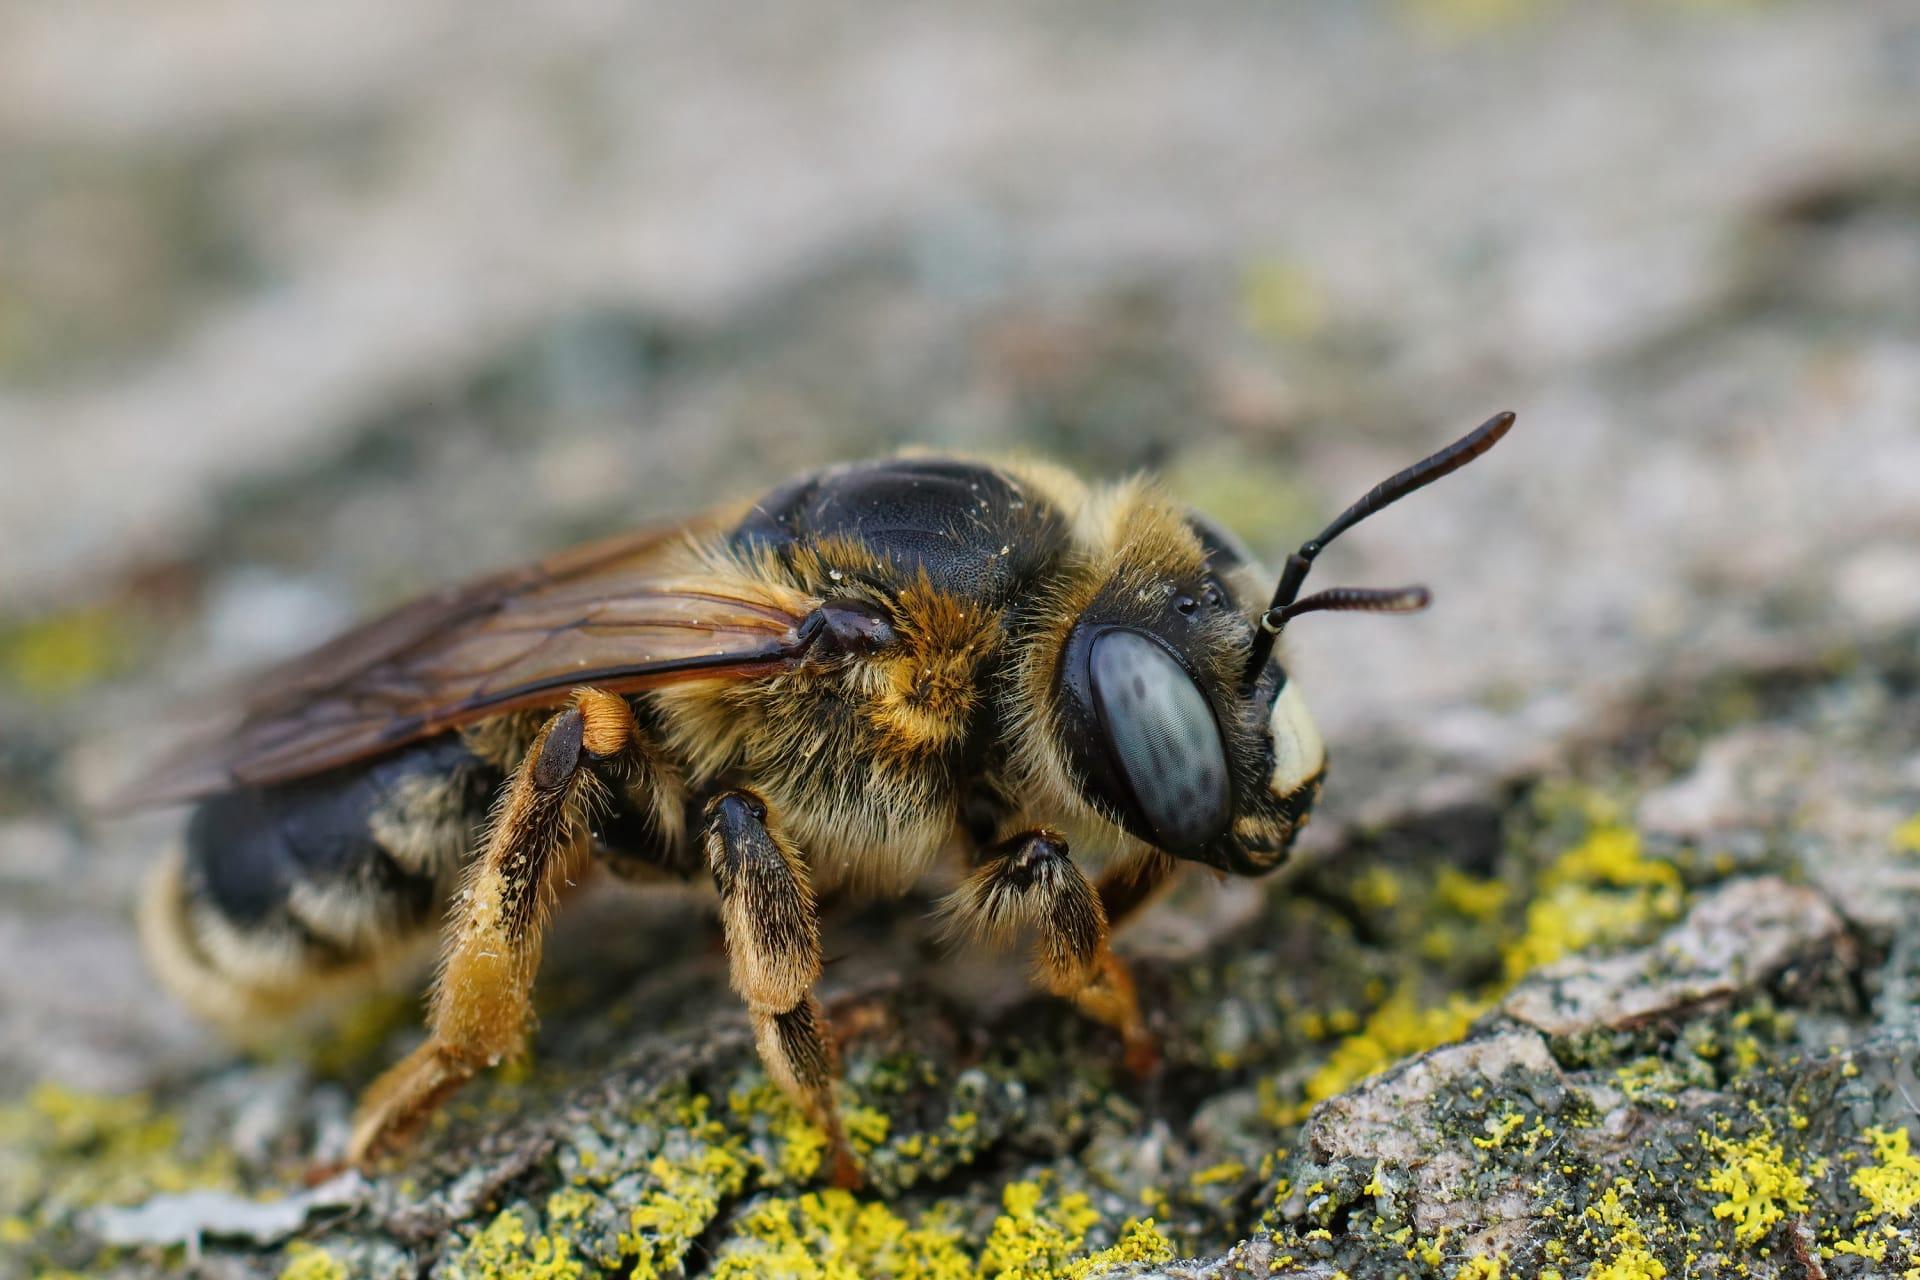 Mason bee pictures